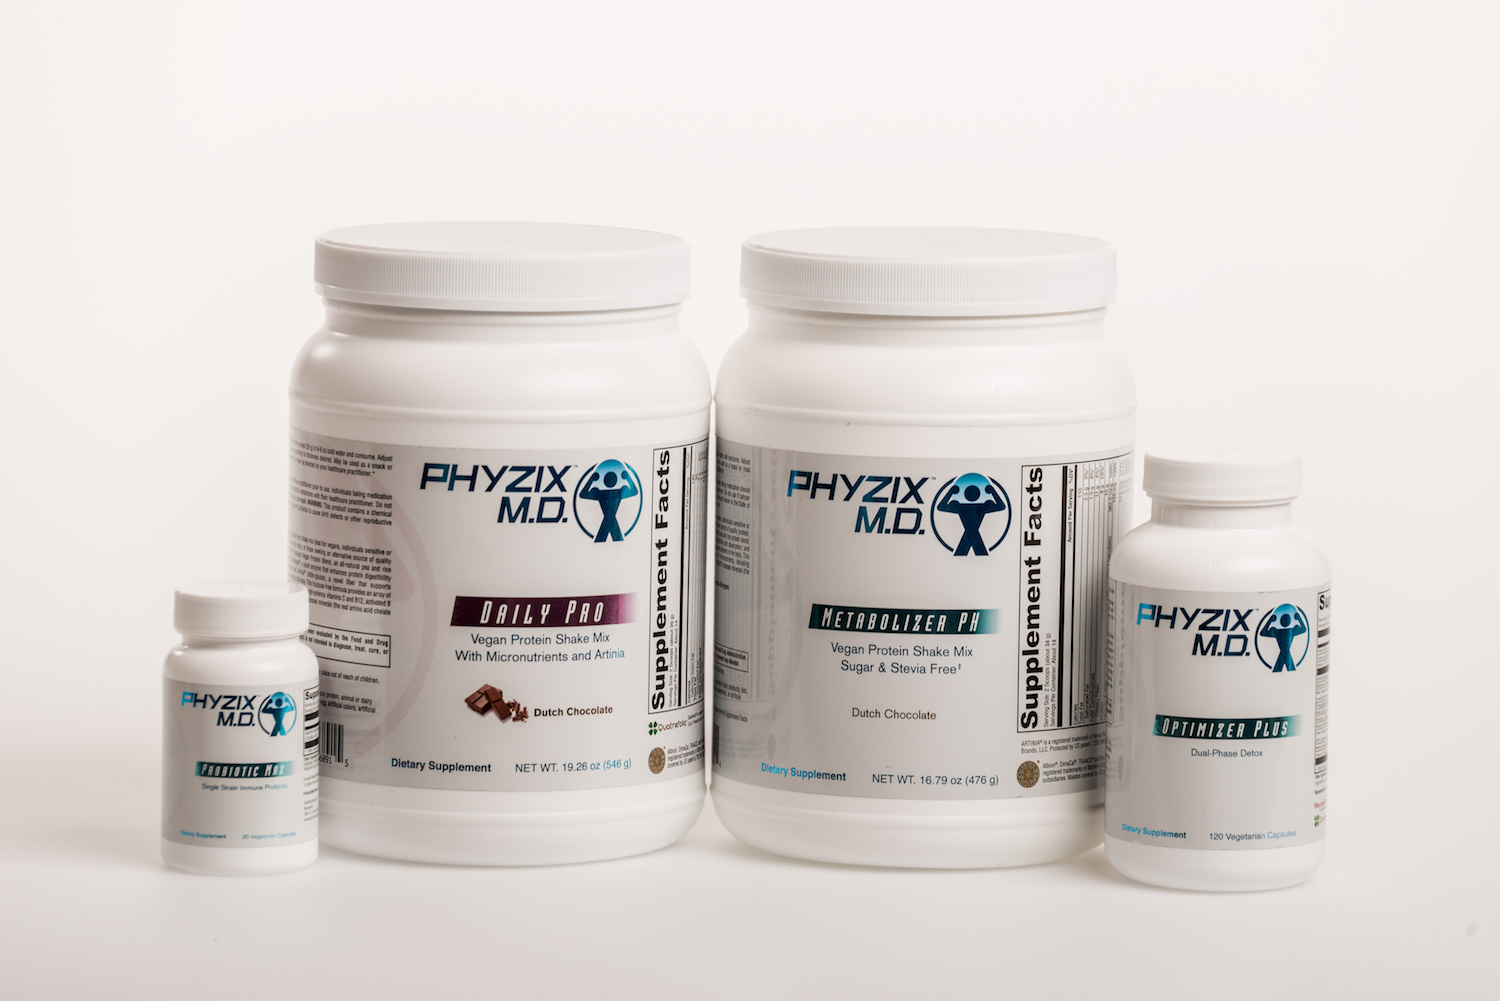 Pictured here is the Phyzix MD Cleanse product line.